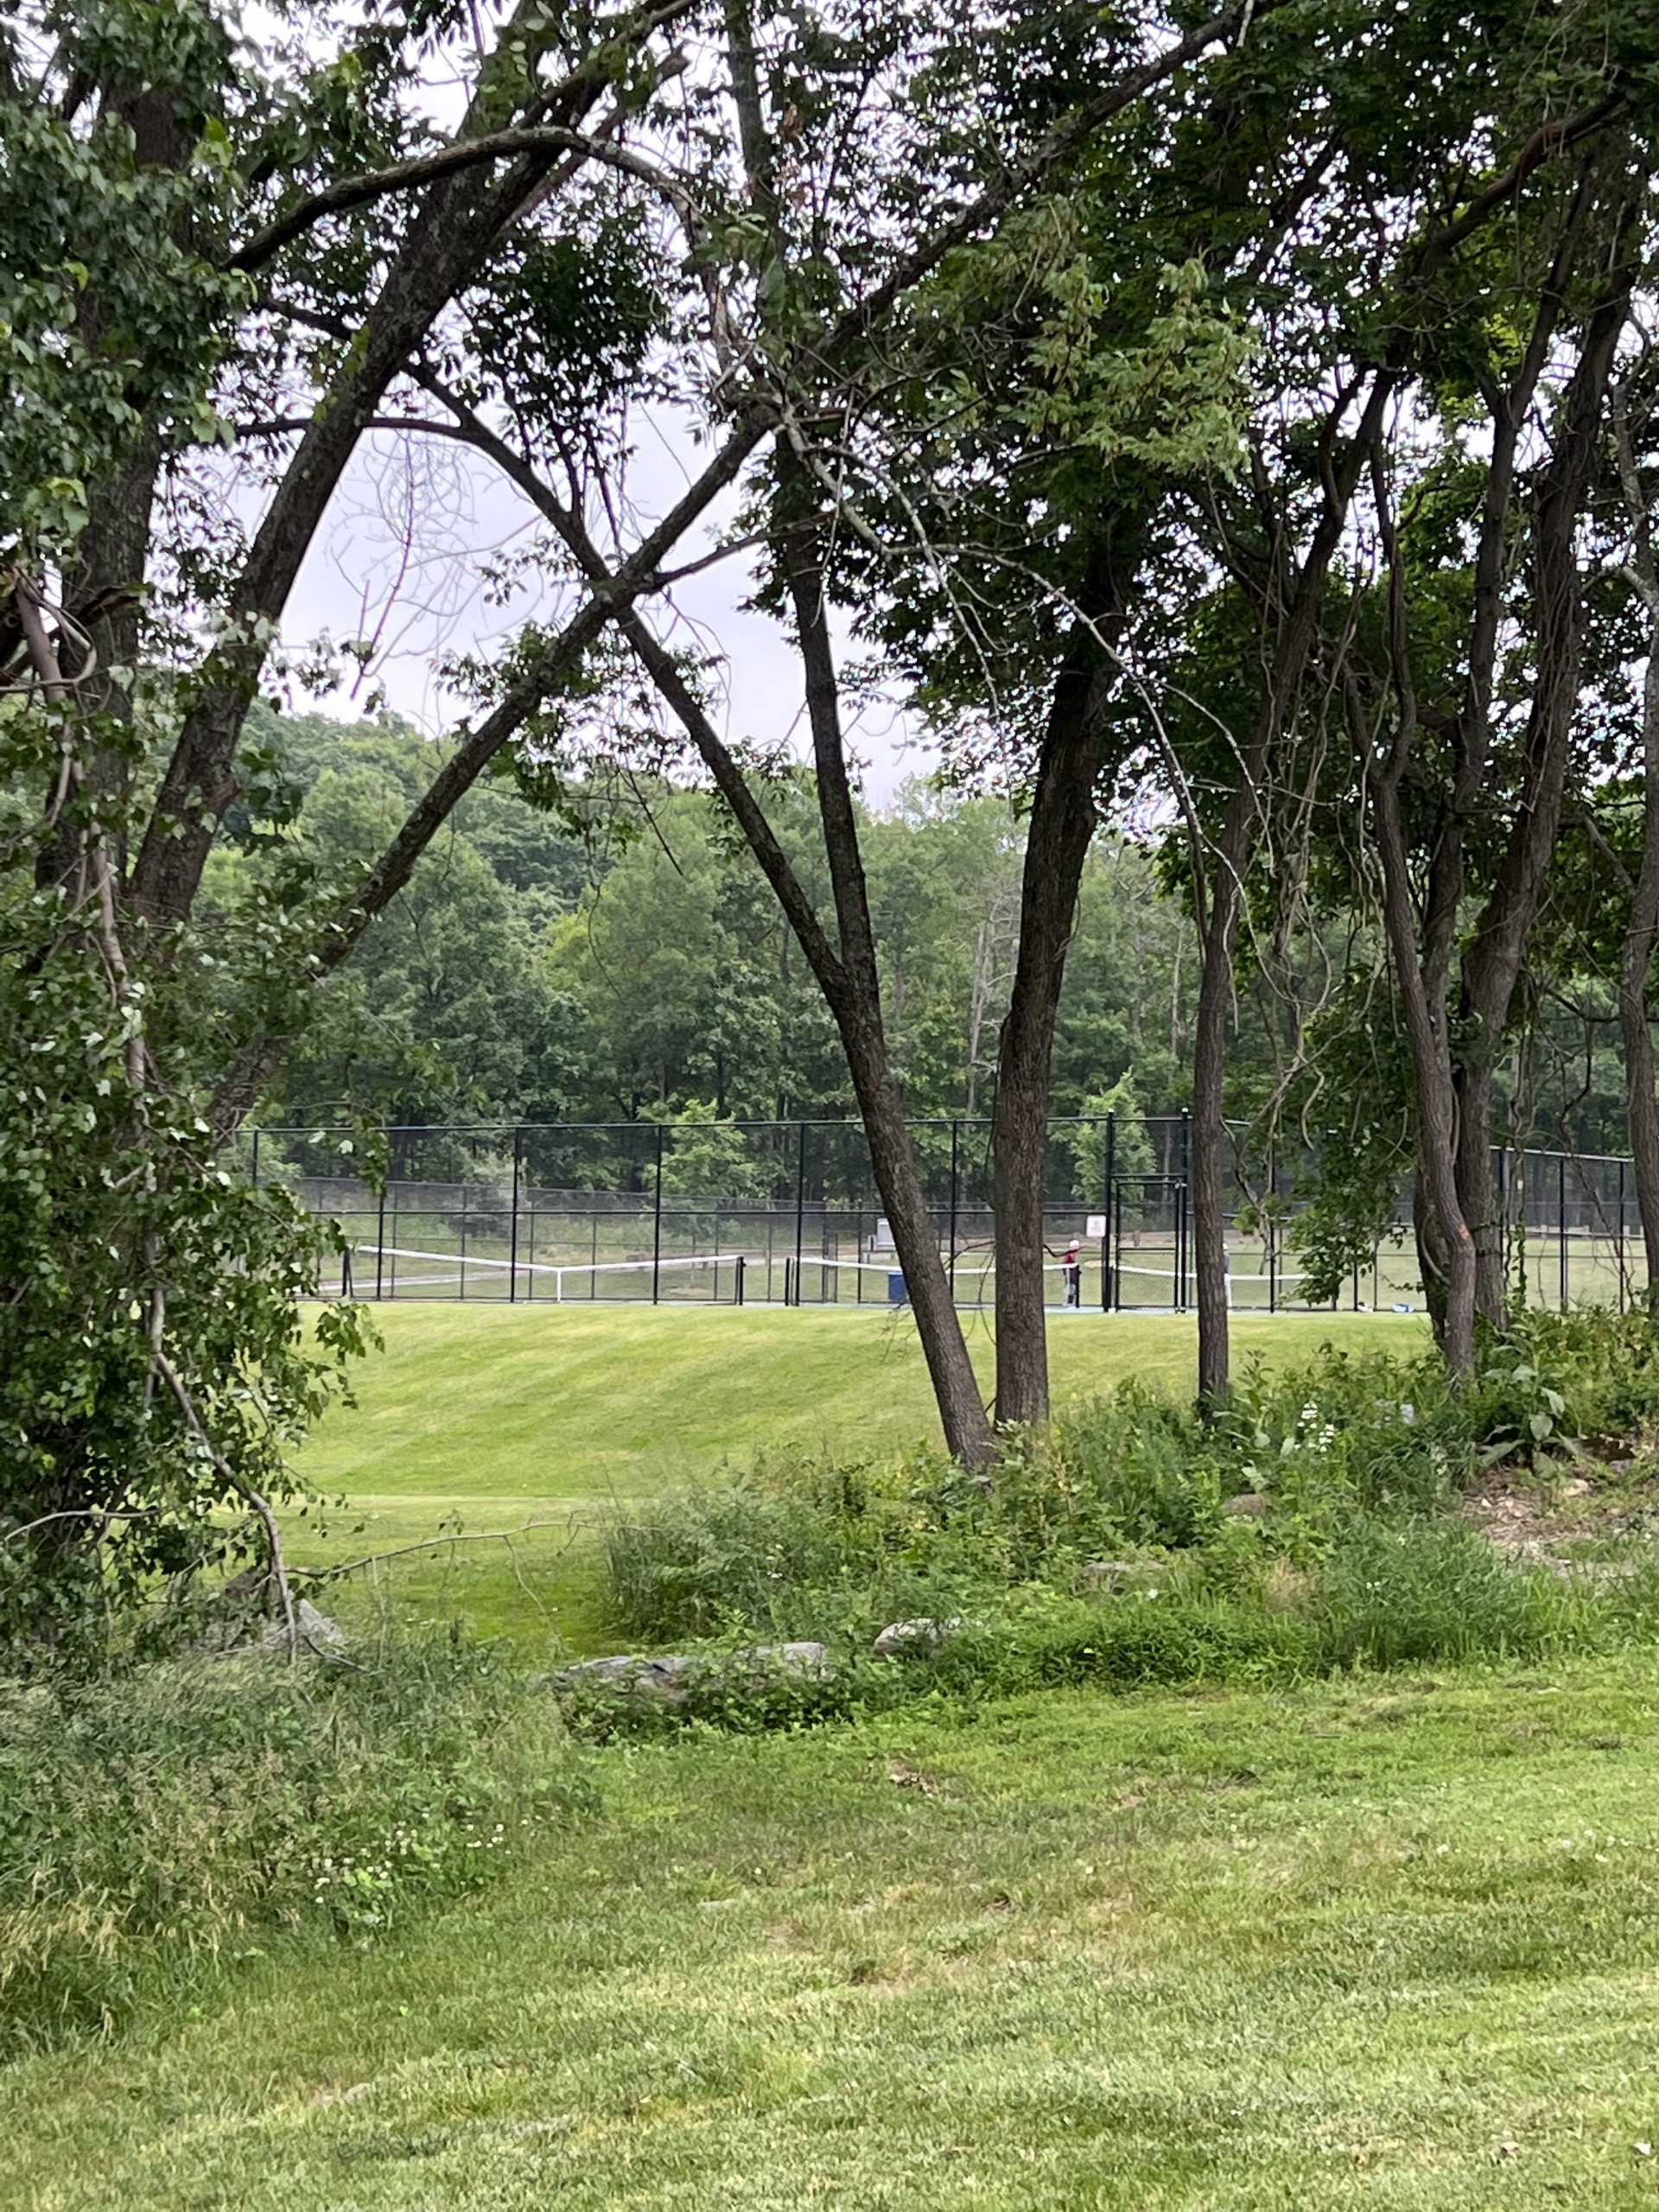 tennis courts in the distance at C O Johnson Park in Byram Township NJ